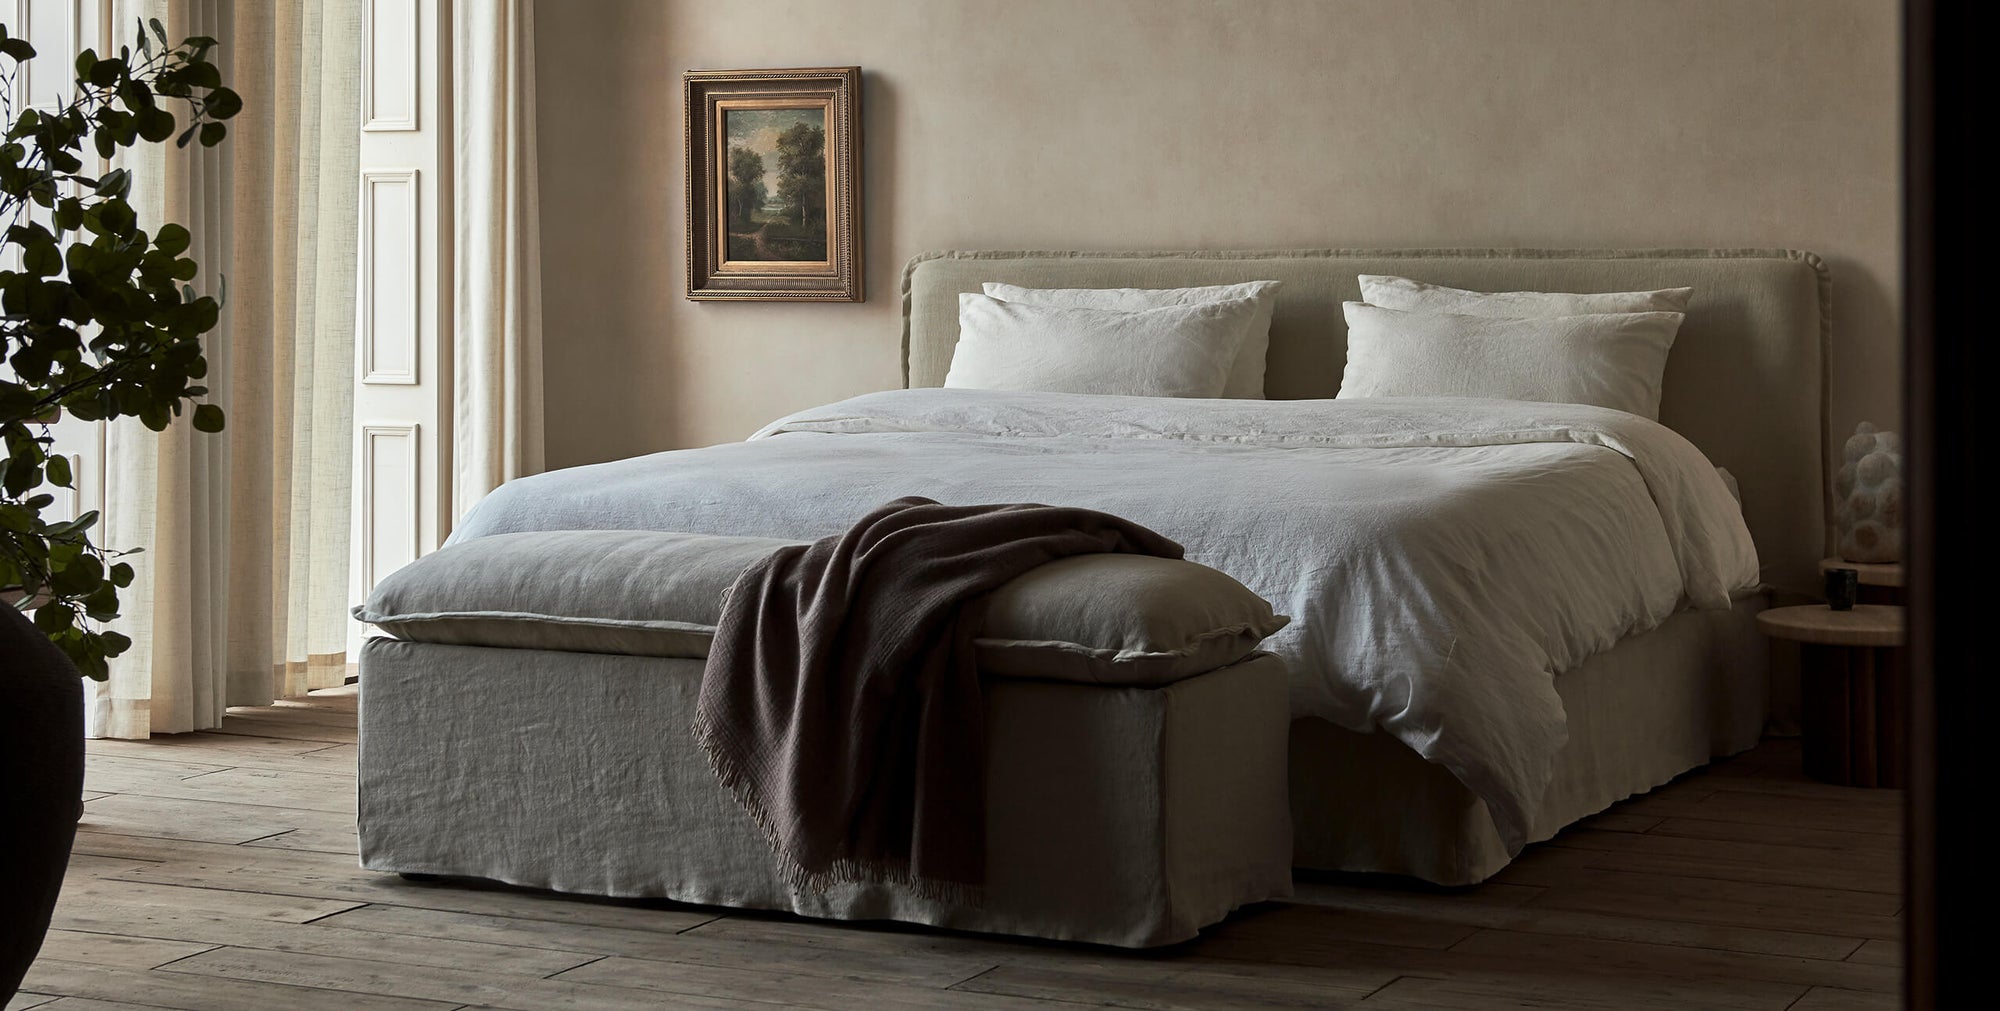 Neva Storage Bench in Jasmine Rice, a light warm greige Medium Weight Linen, at the foot of a Neva Bed